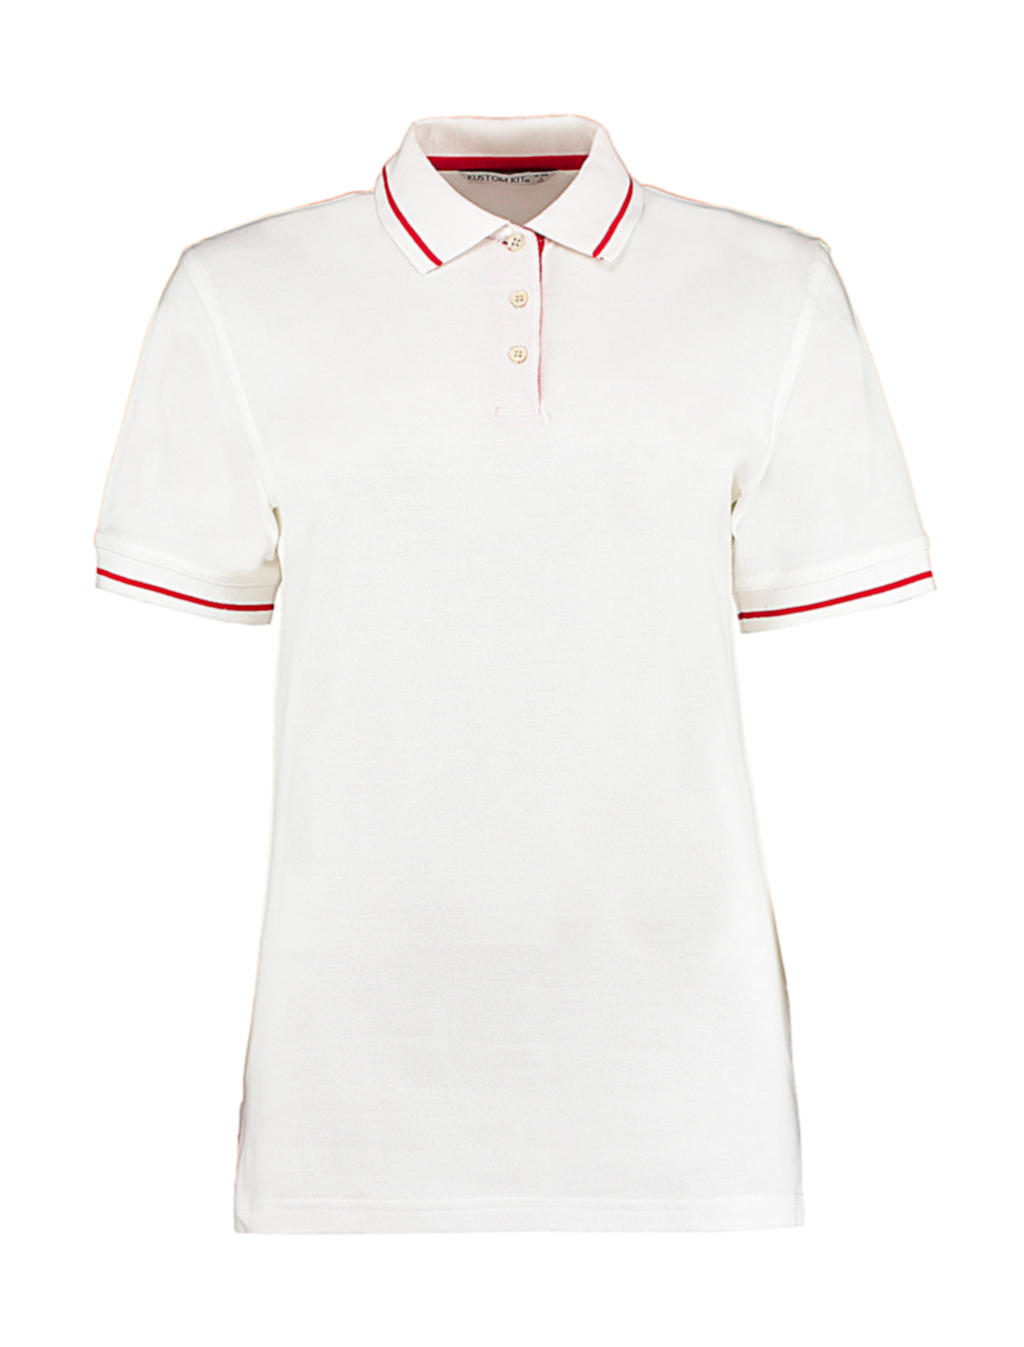  Womens St. Mellion Polo in Farbe White/Red